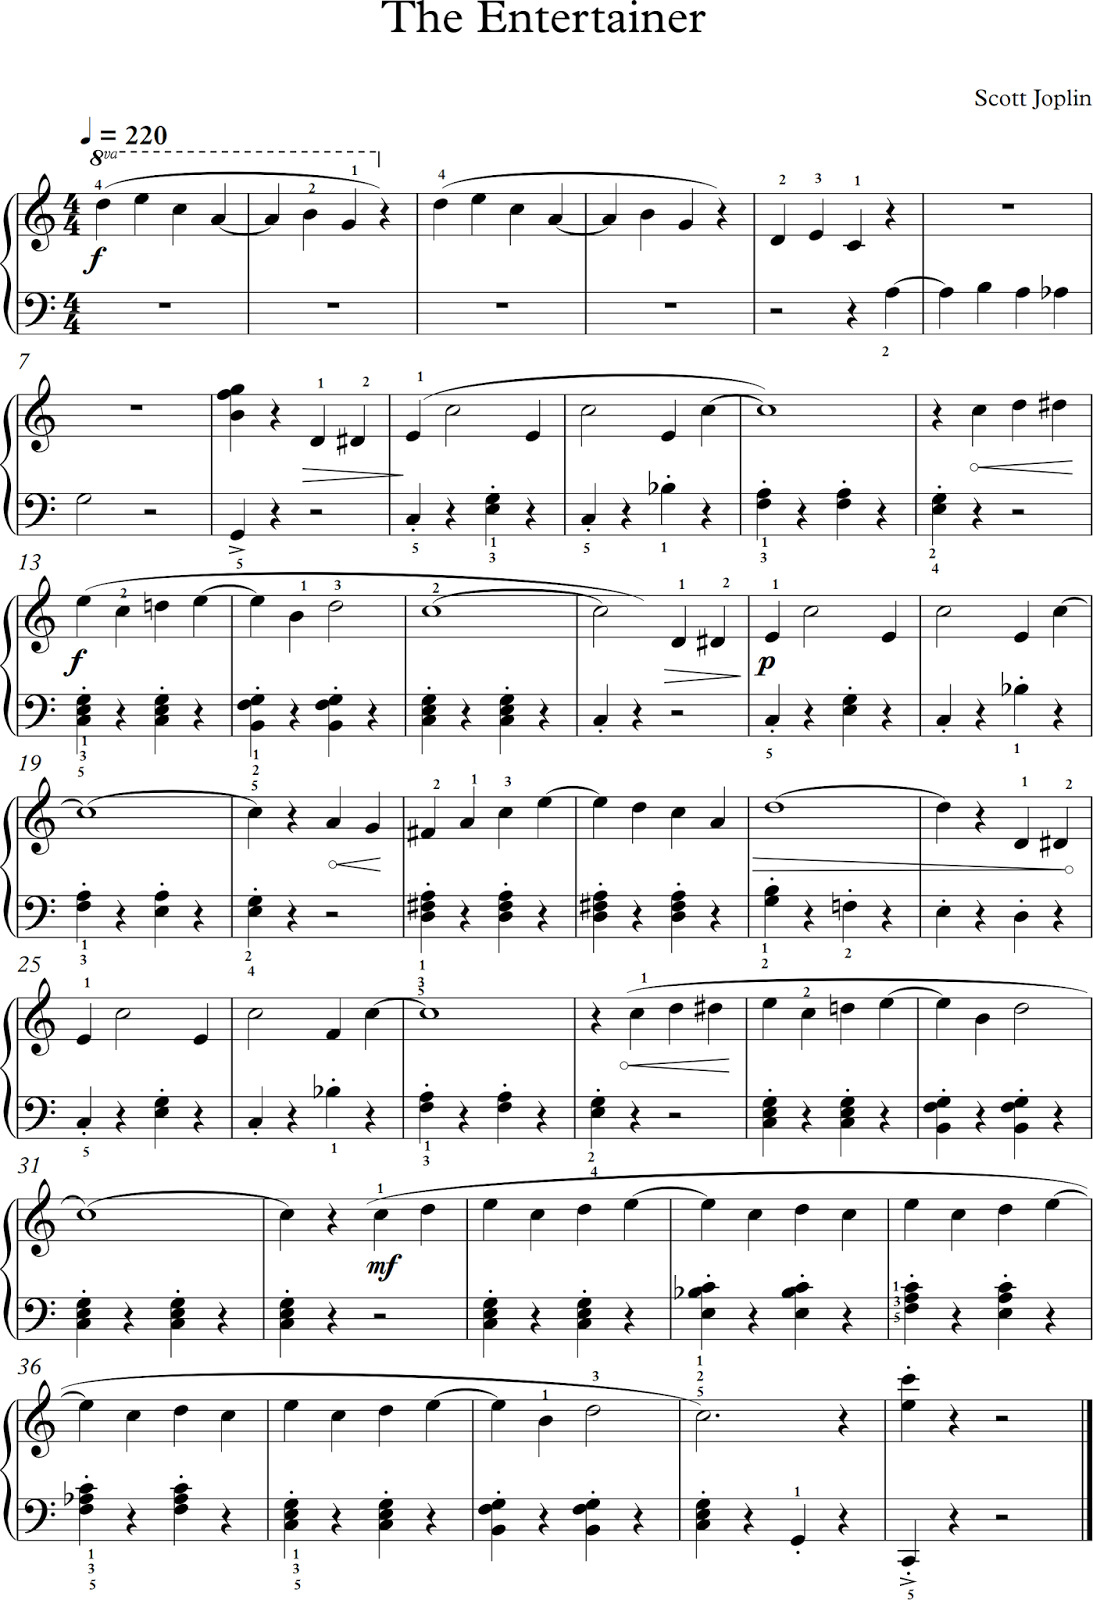 Free Printable Sheet Music For The Entertainer | Free Printable